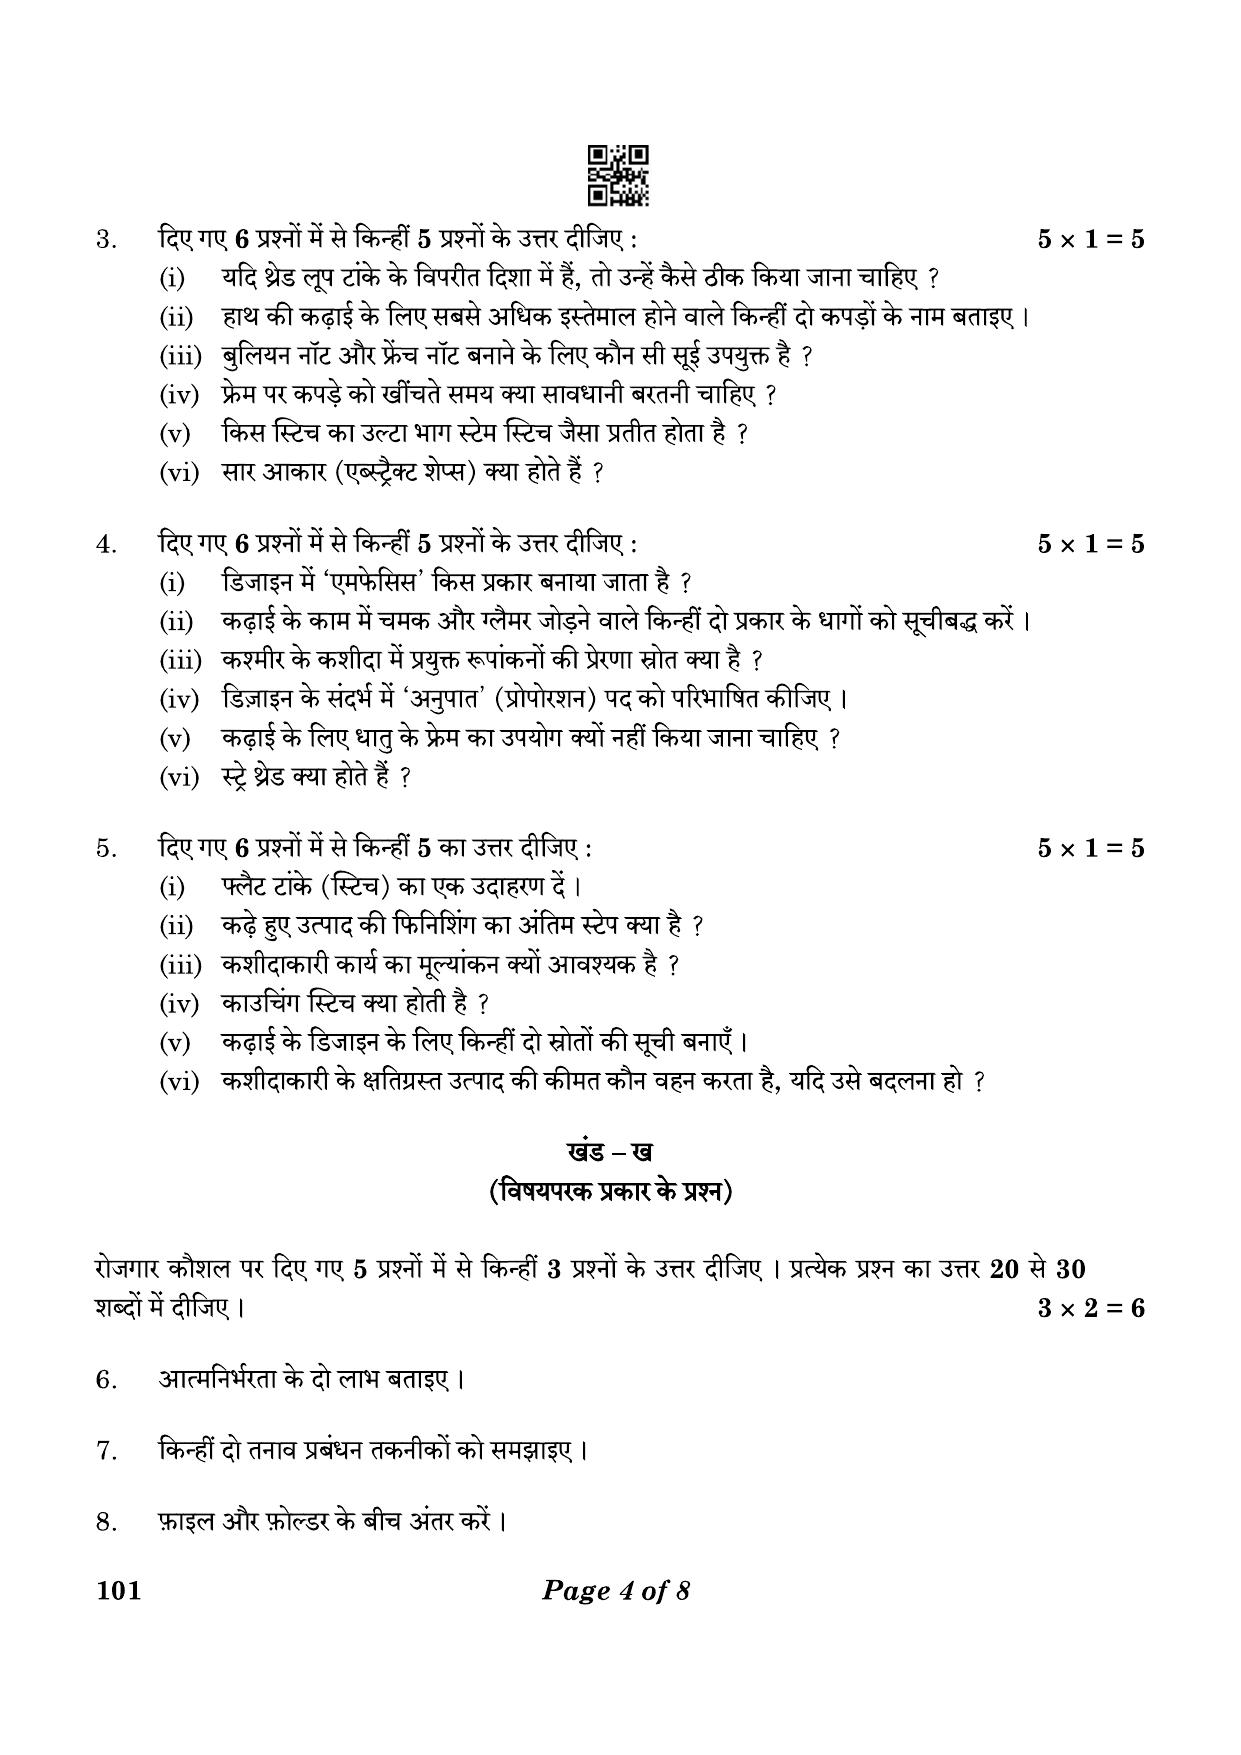 CBSE Class 10 101 Apparel 2023 Question Paper - Page 4